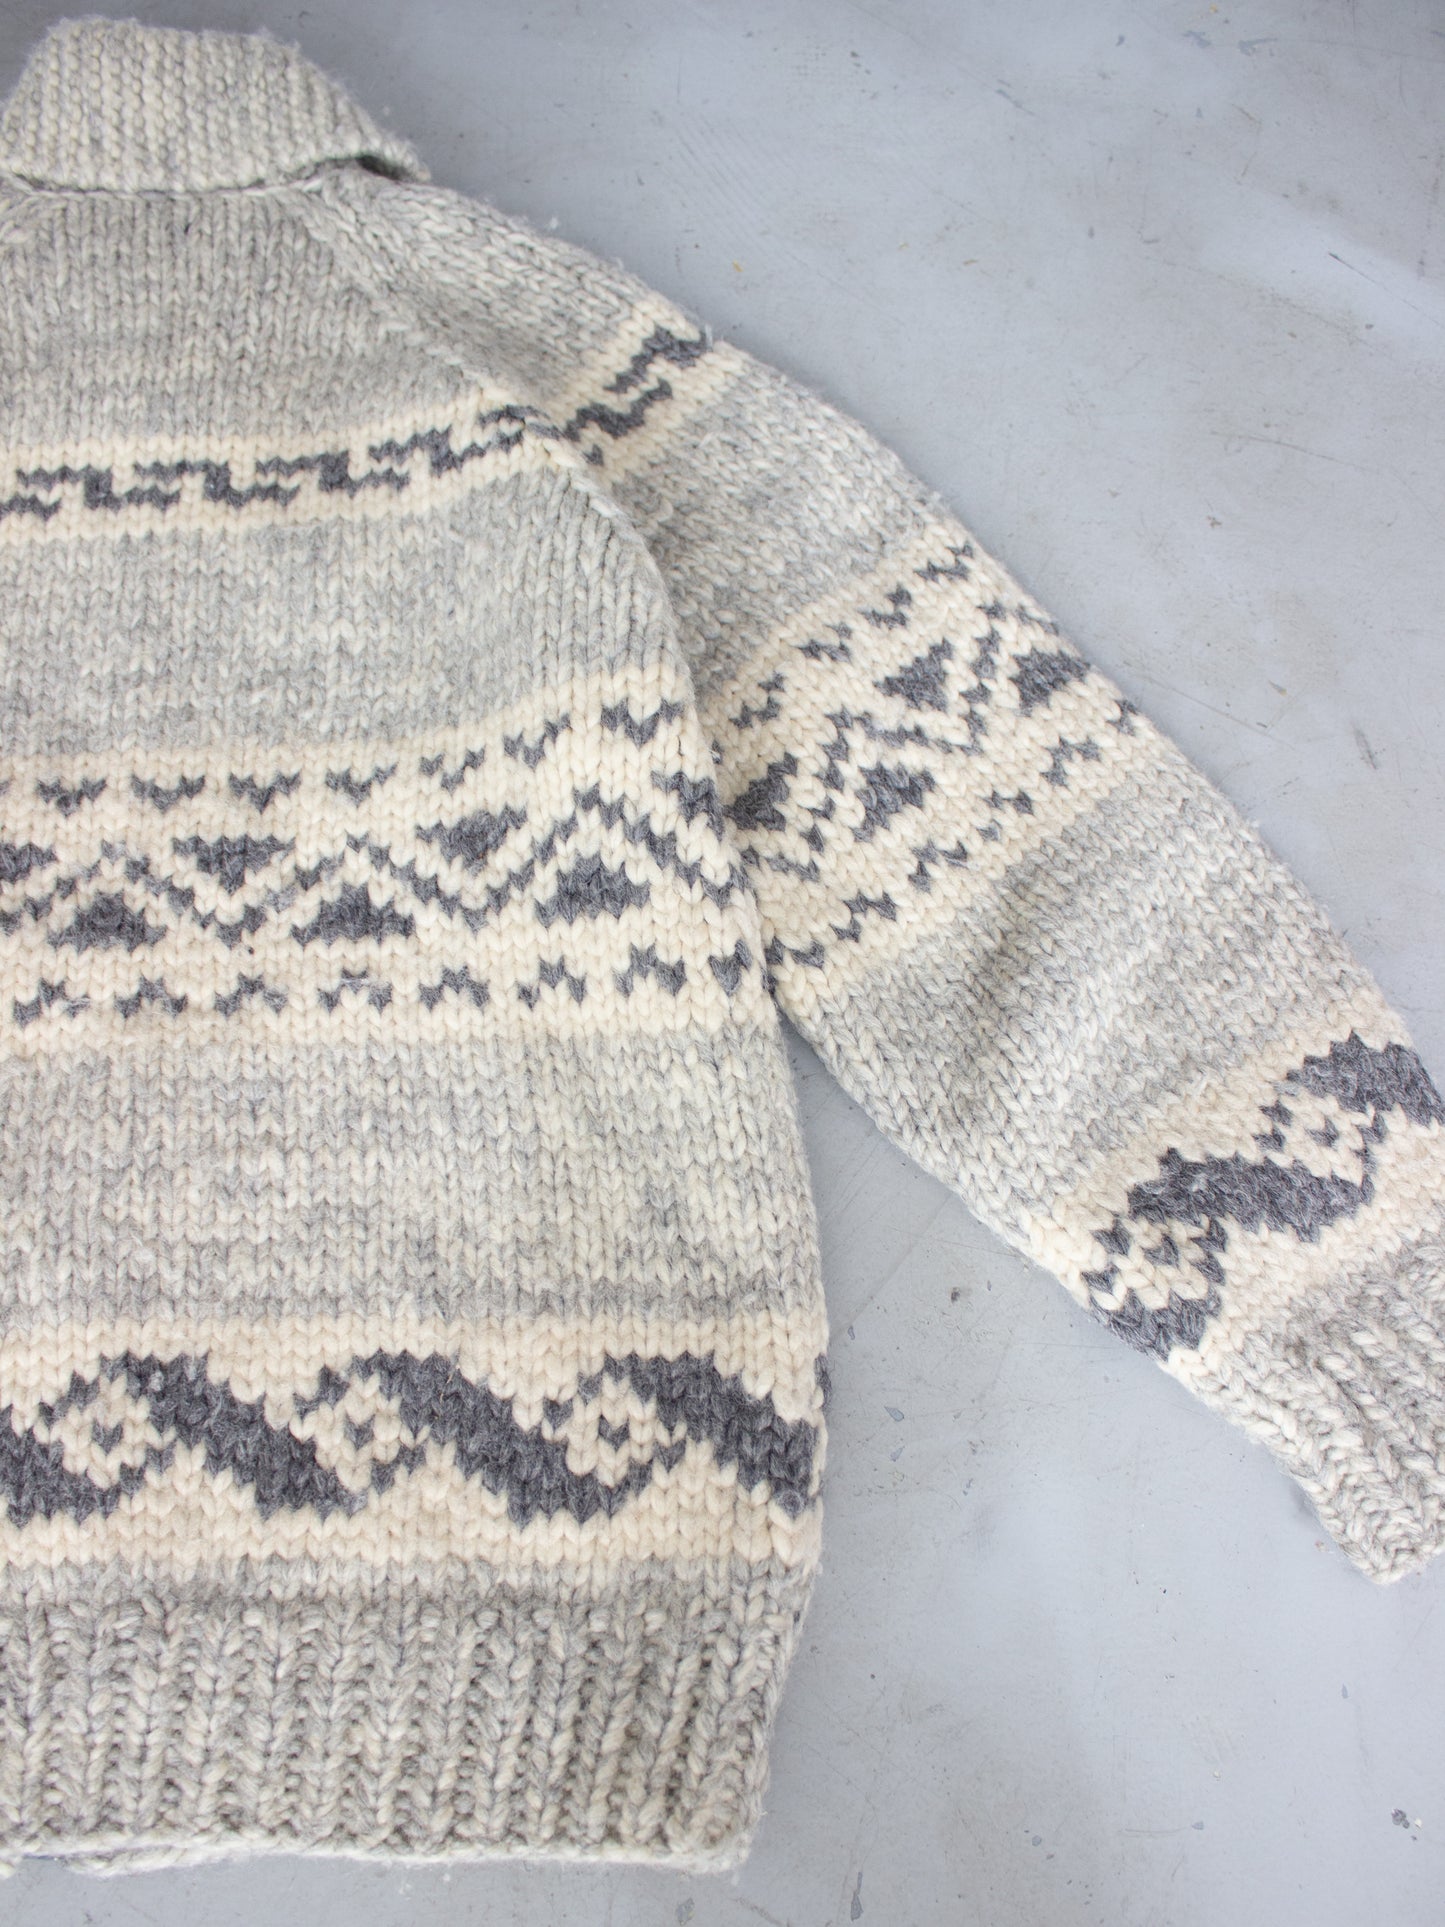 Vintage Cowichan Style Thick Wool Knit Sweater in Gray and Beige with Acme Zipper Medium-Large